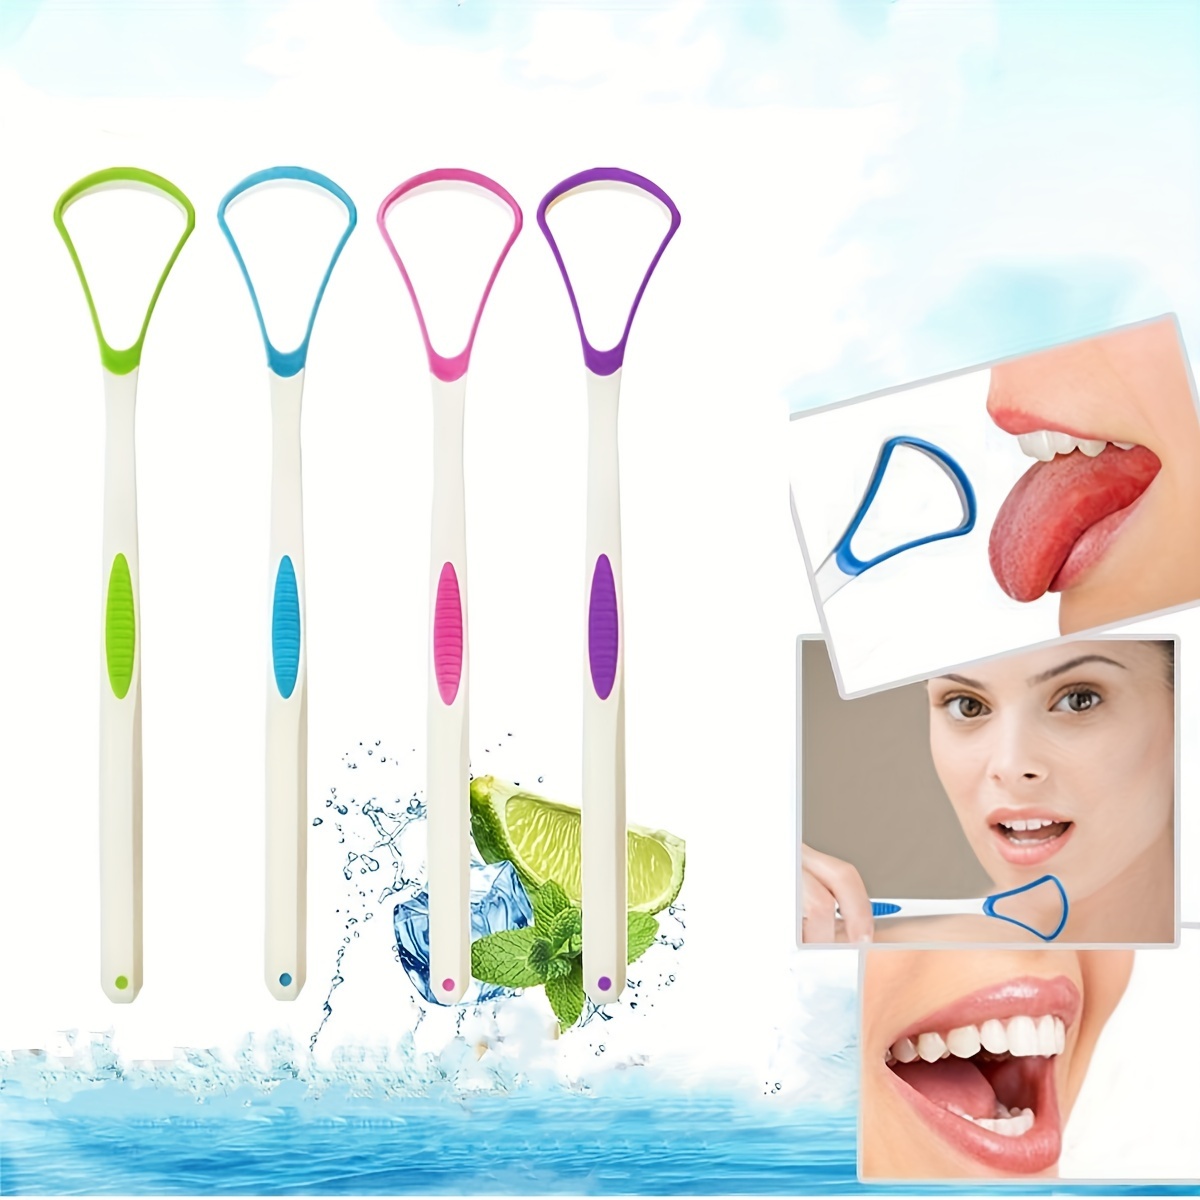 

4pcs Tongue Scraper, Tongue Coating Scraper, Fresh Breath For Oral Care, Tongue Cleaners, Tongue Cleaning Tools For Adults